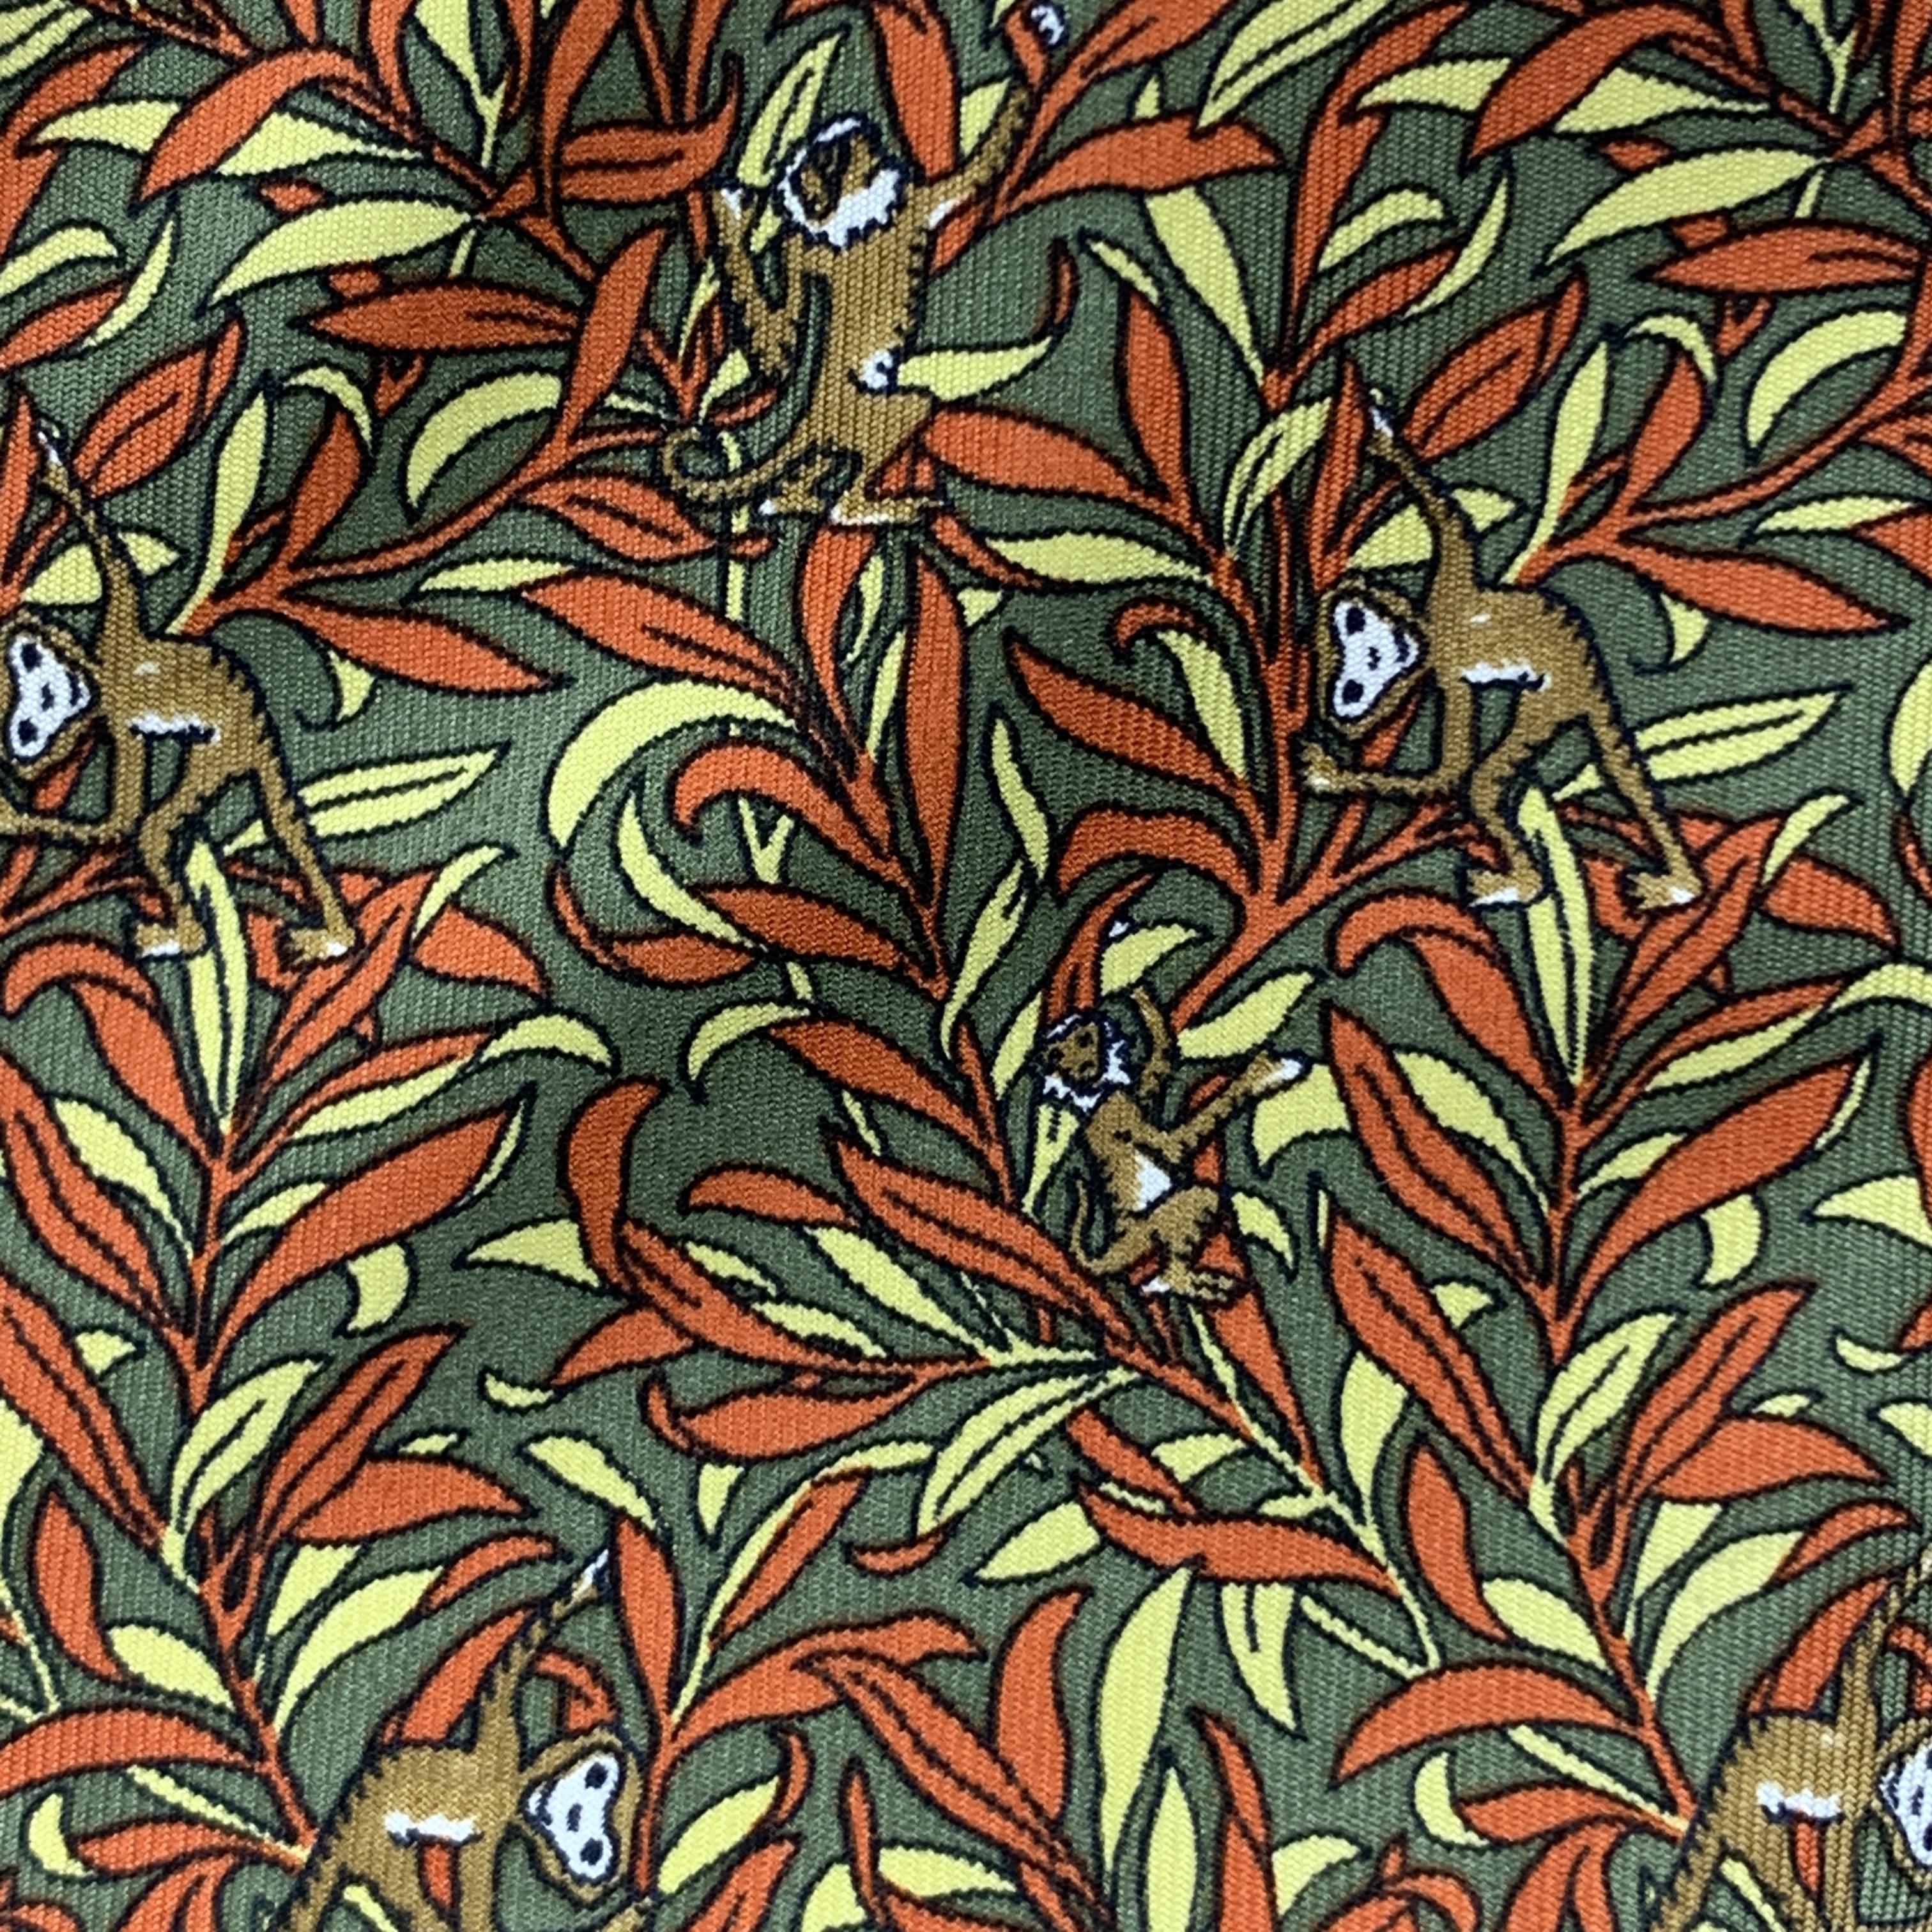 SALVATORE FERRAGAMO necktie comes in olive green and burnt orange pattern silk twill with all over monkeys print. Made in Italy.

Very Good Pre-Owned Condition.

Width: 3.5 in.